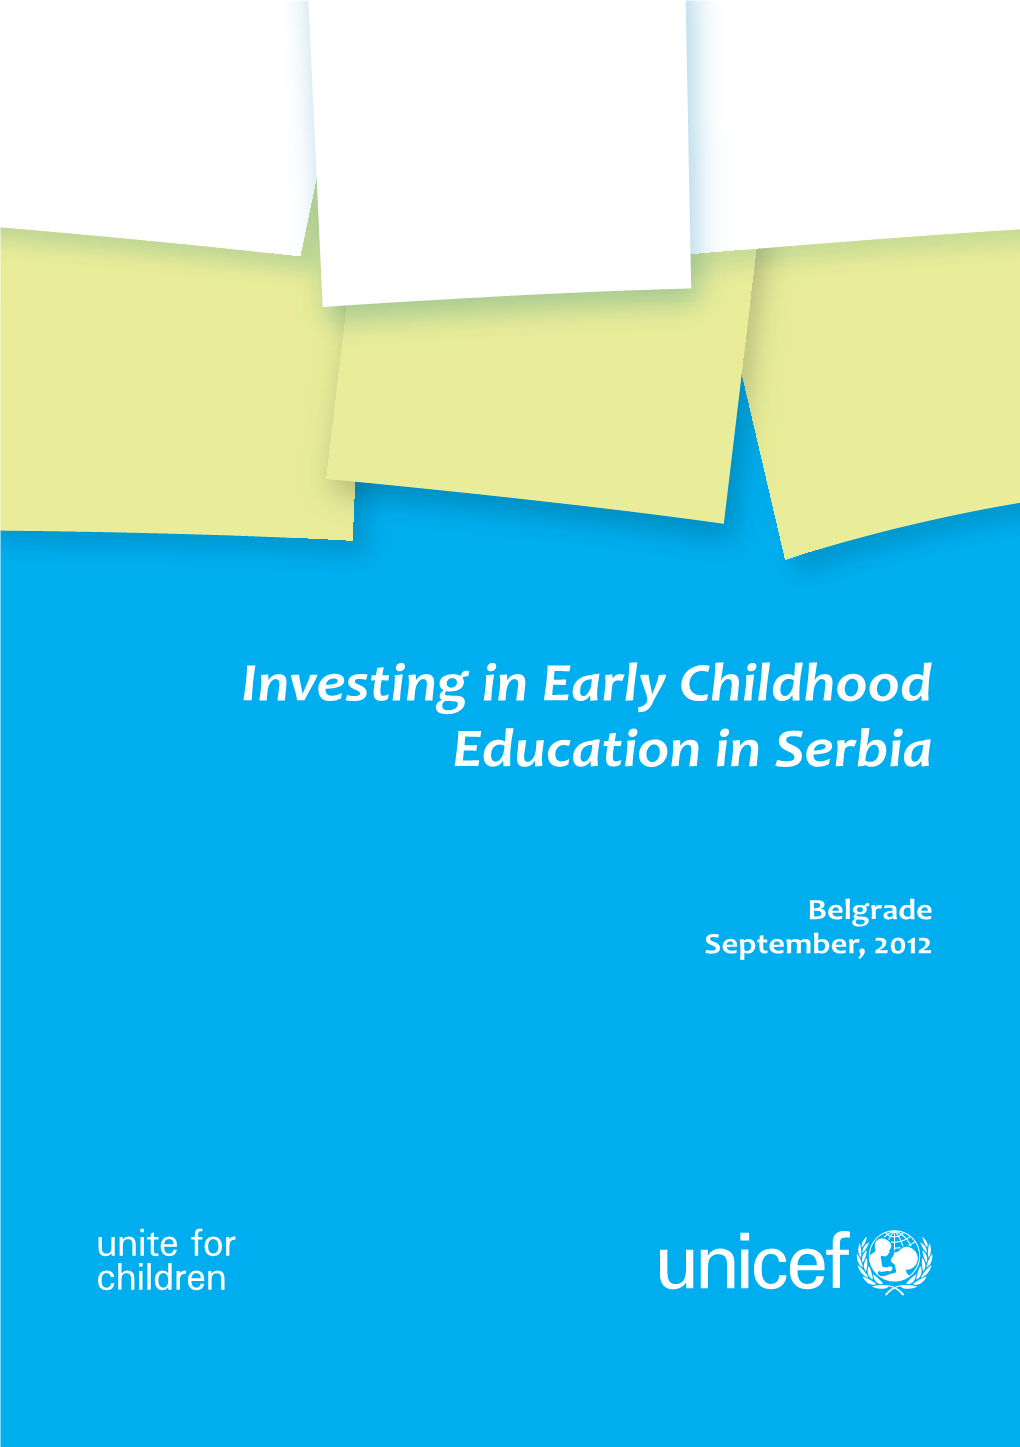 Investing in Early Childhood Education in Serbia